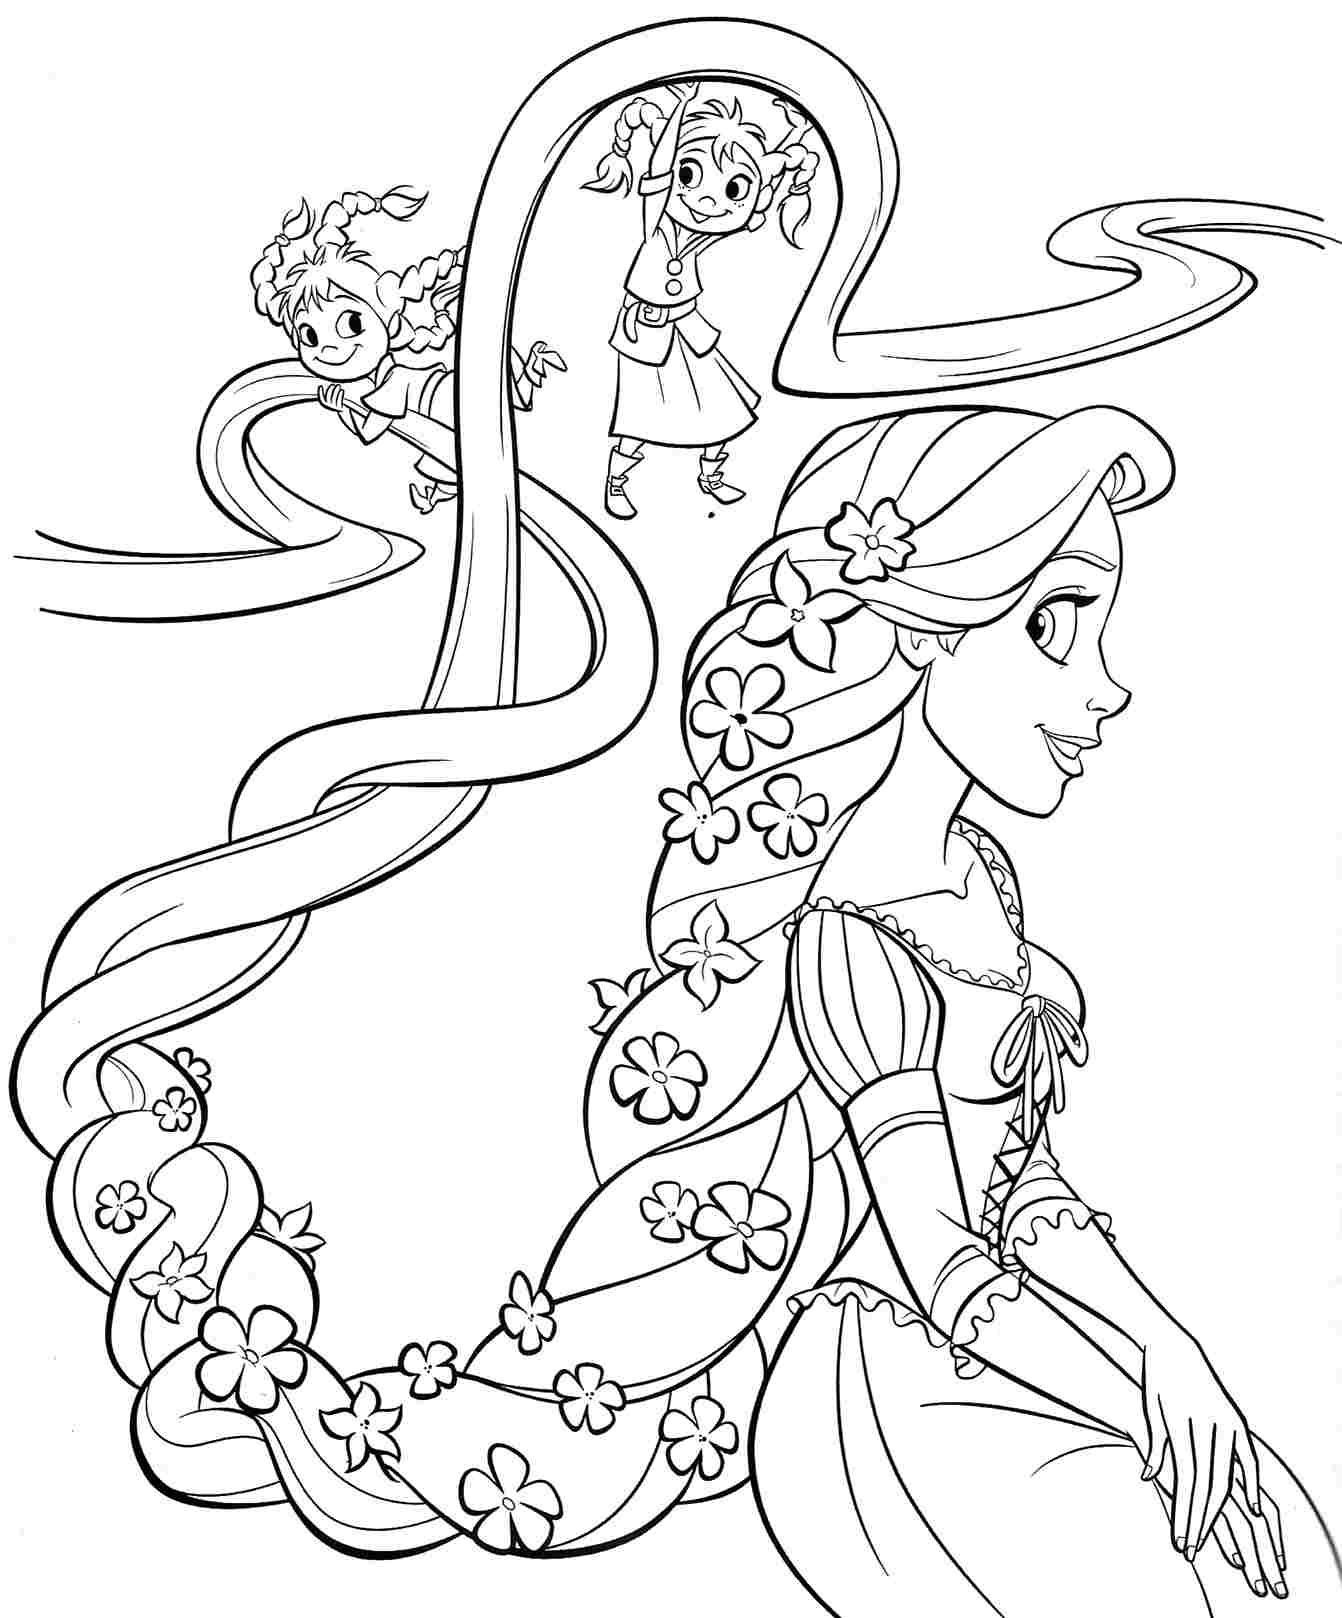 Disney Rapunzel Coloring Pages For Toddlers
 printable free disney princess rapunzel coloring sheets